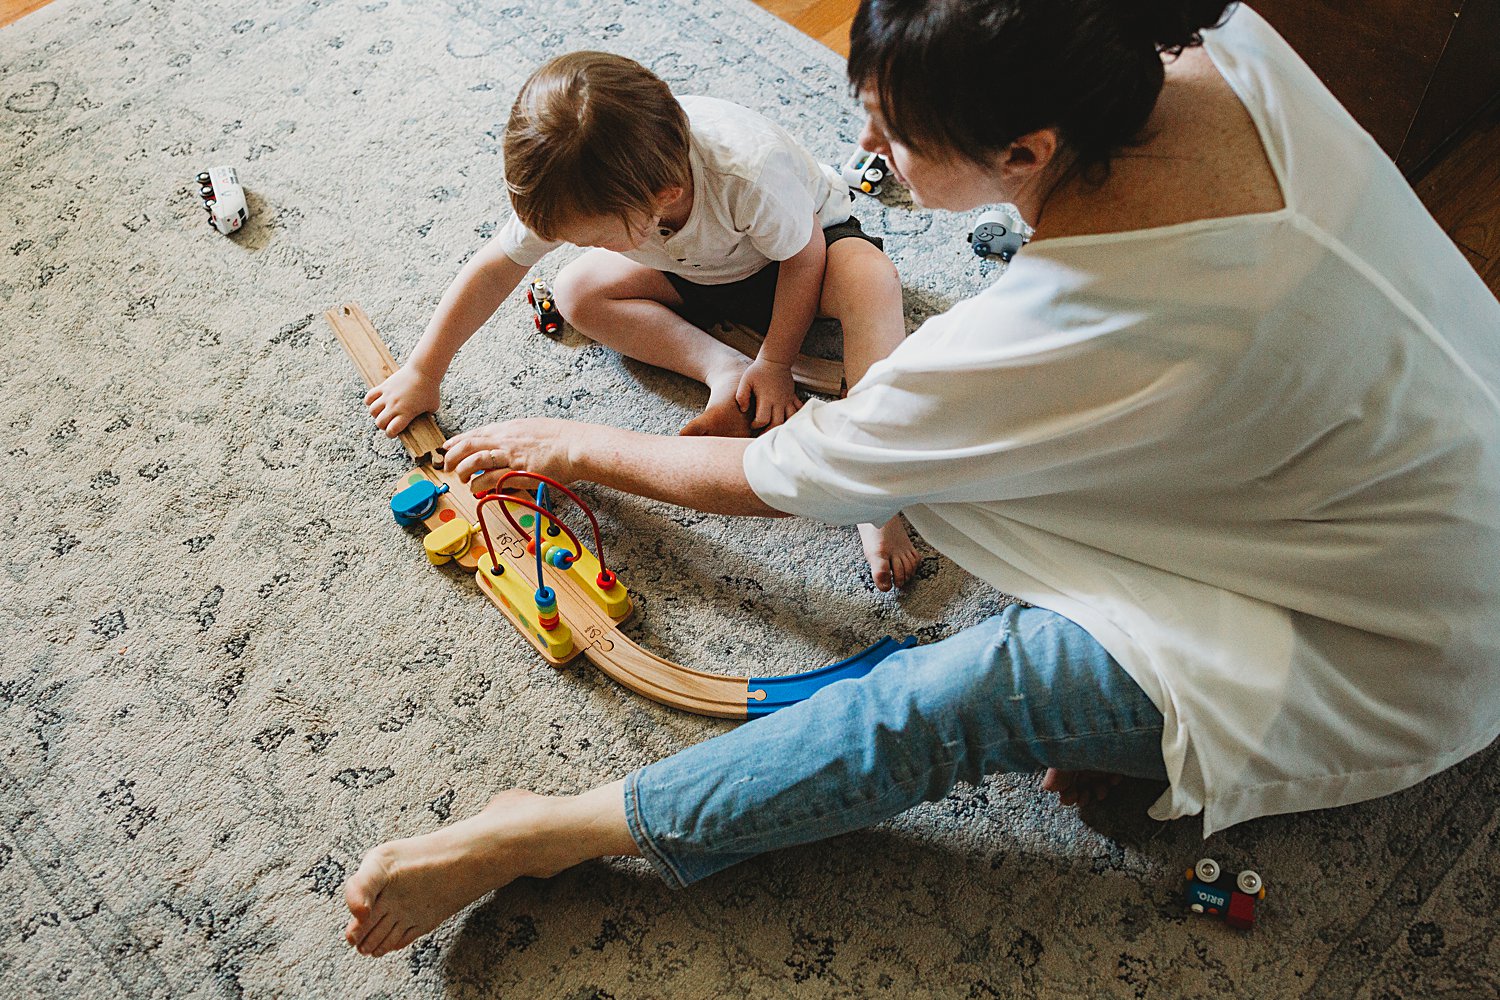 Mom and boy playing with toy